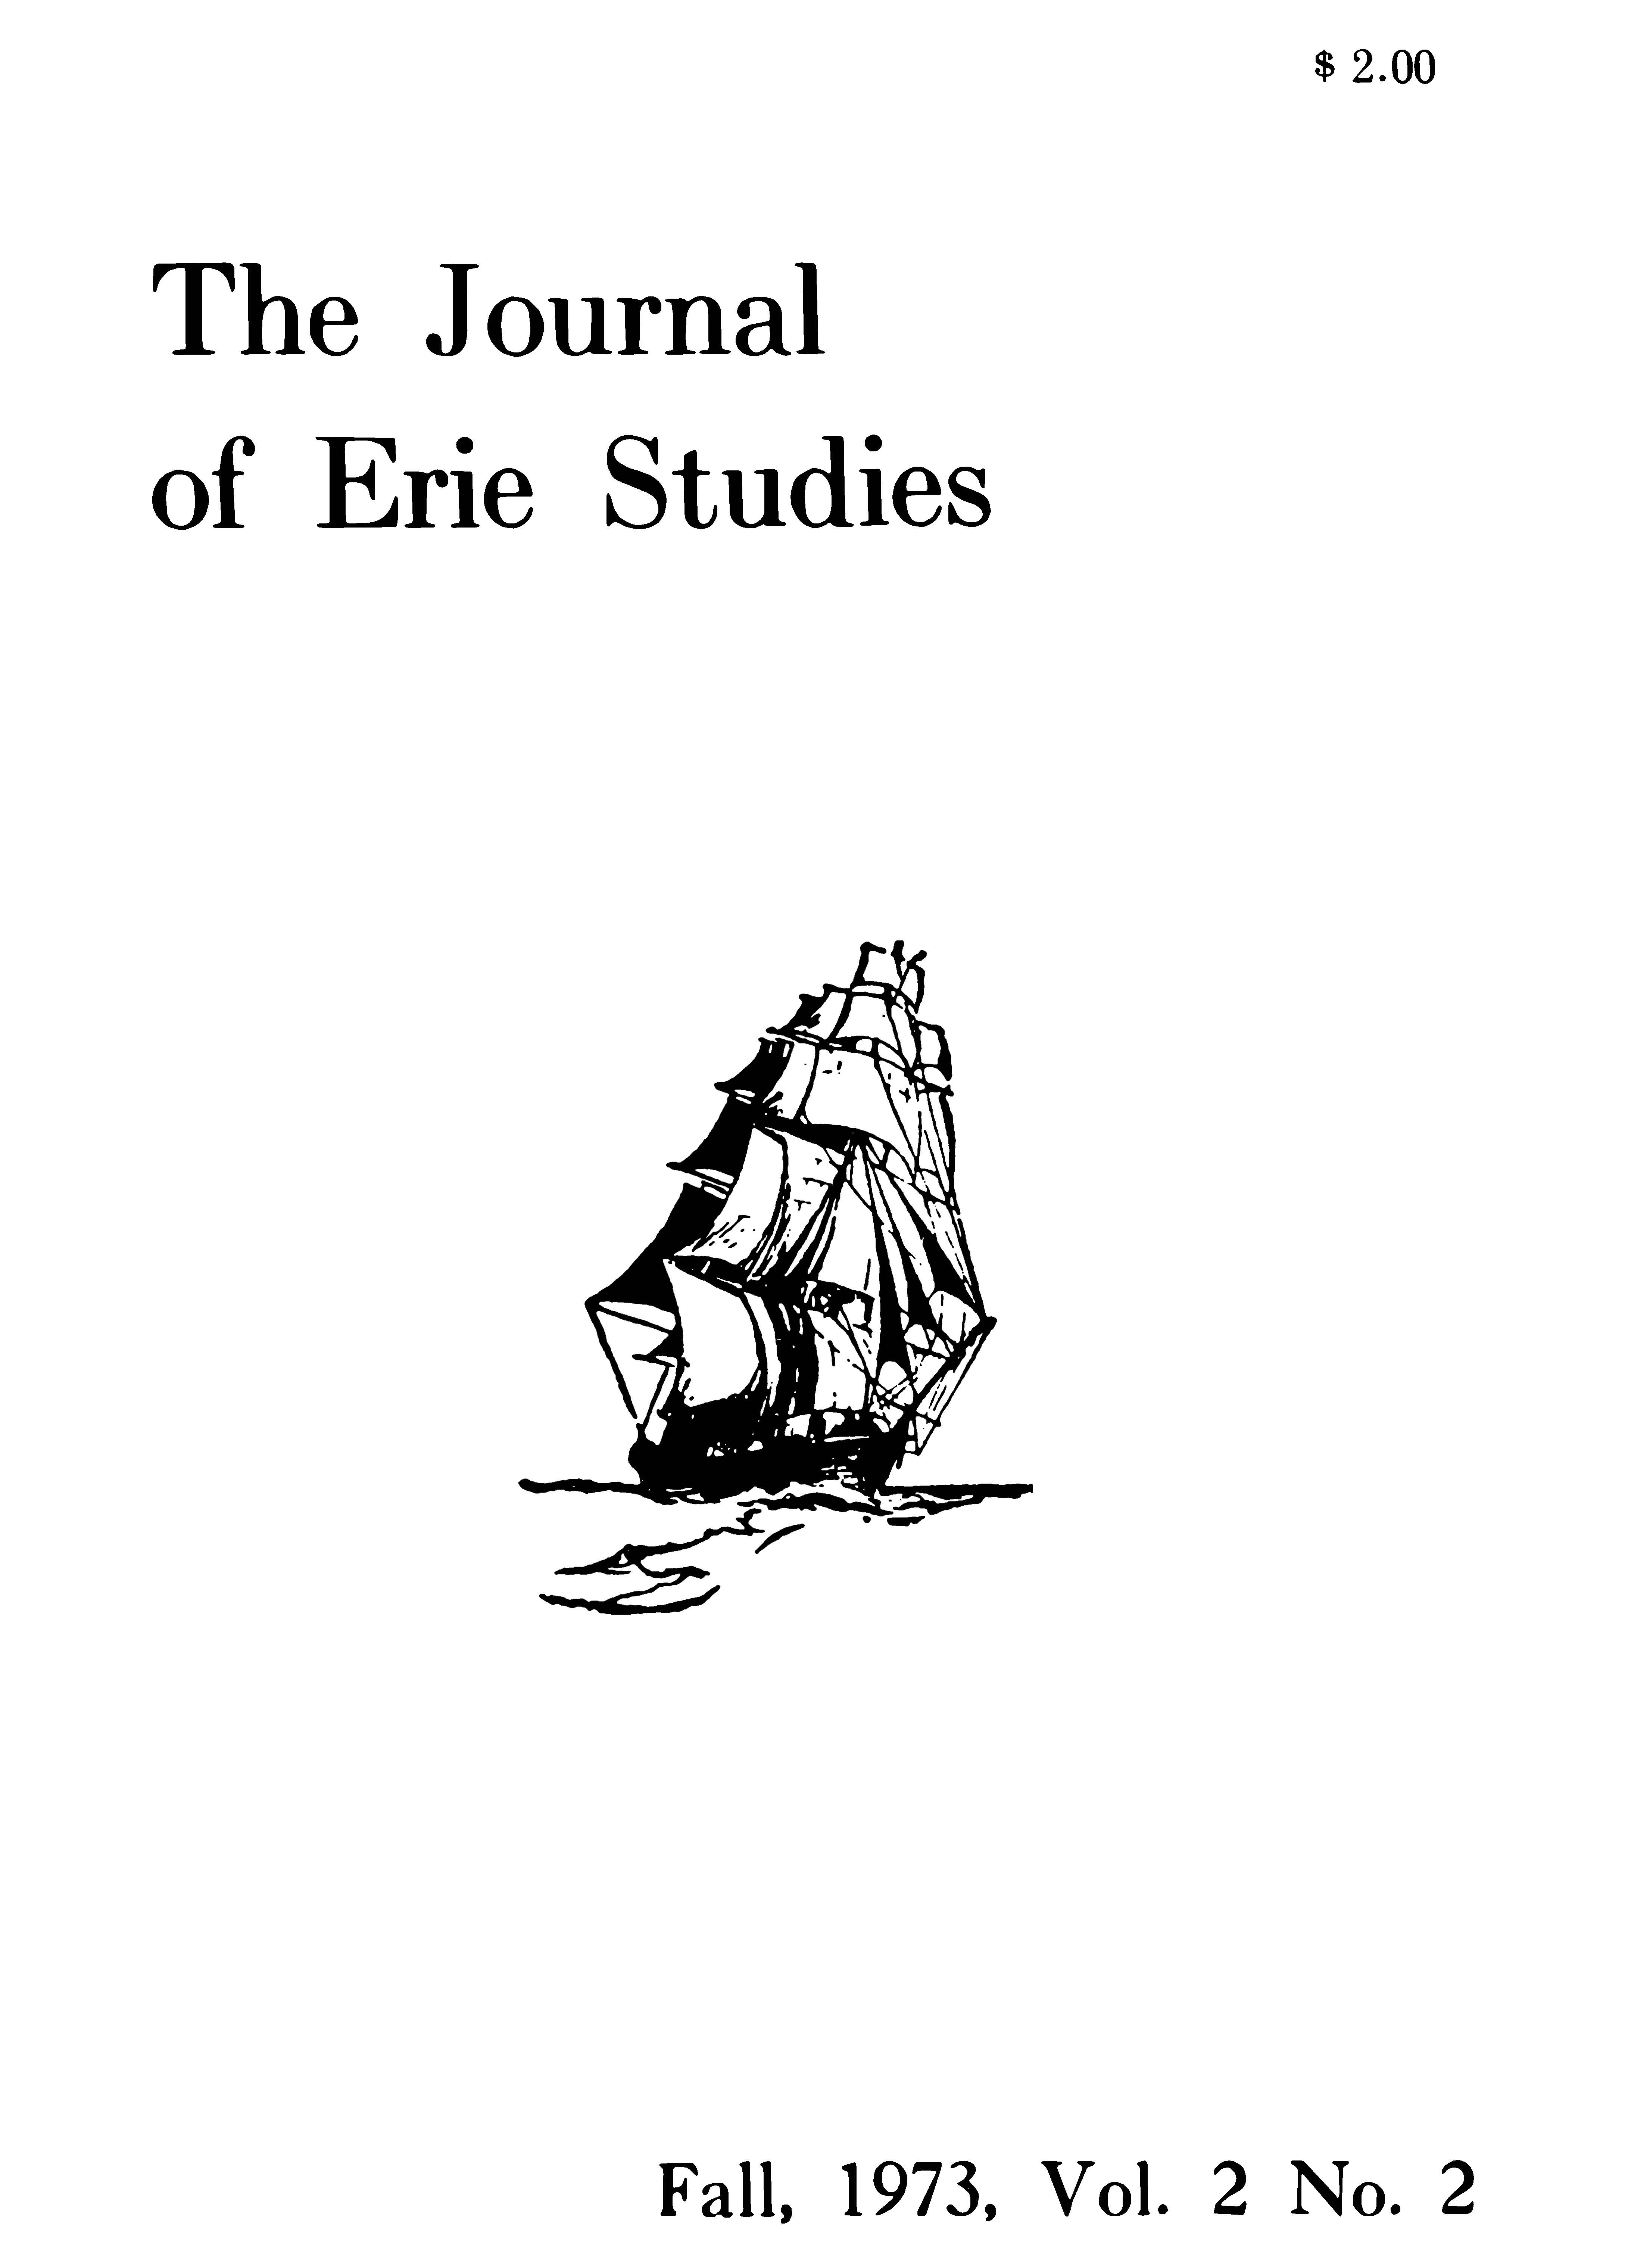 Cover of the fall 1973 issue of The Journal of Erie Studies.